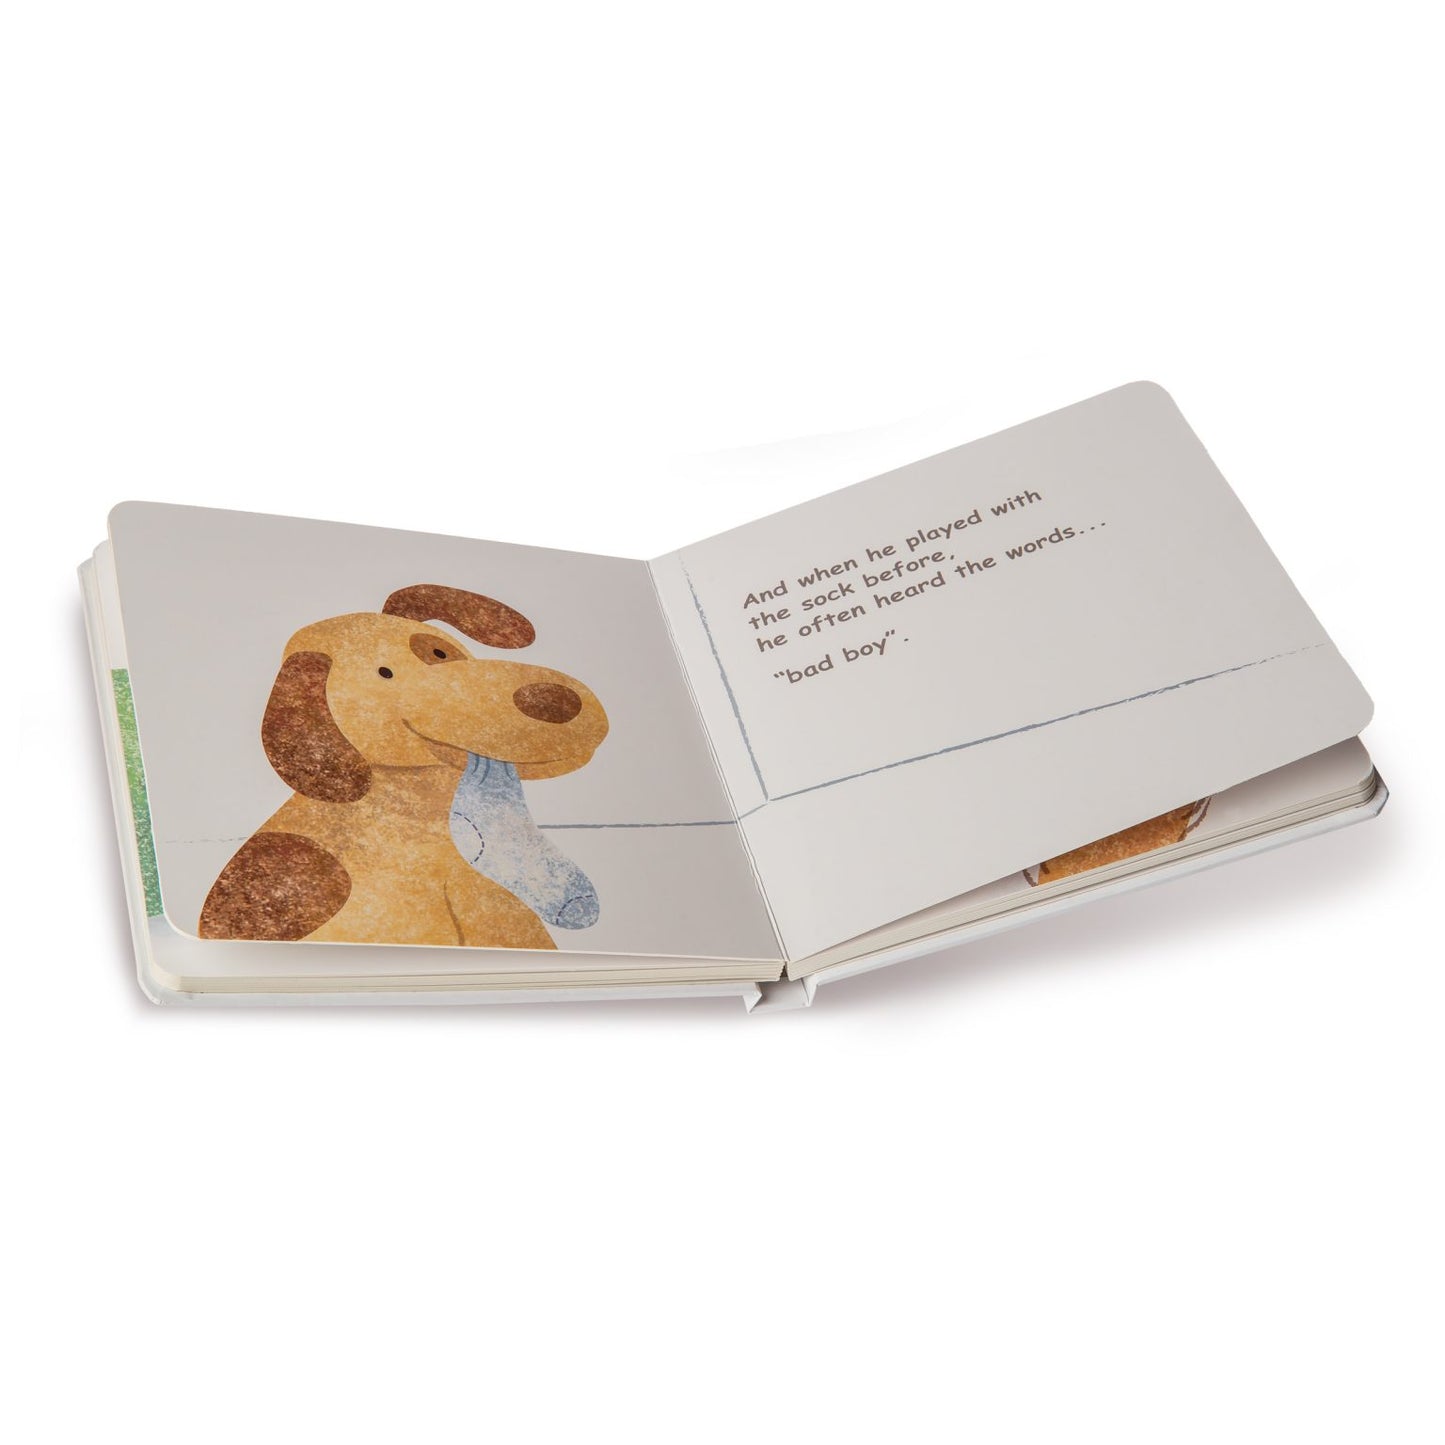 Puppy’s Toy Tale” Board Book